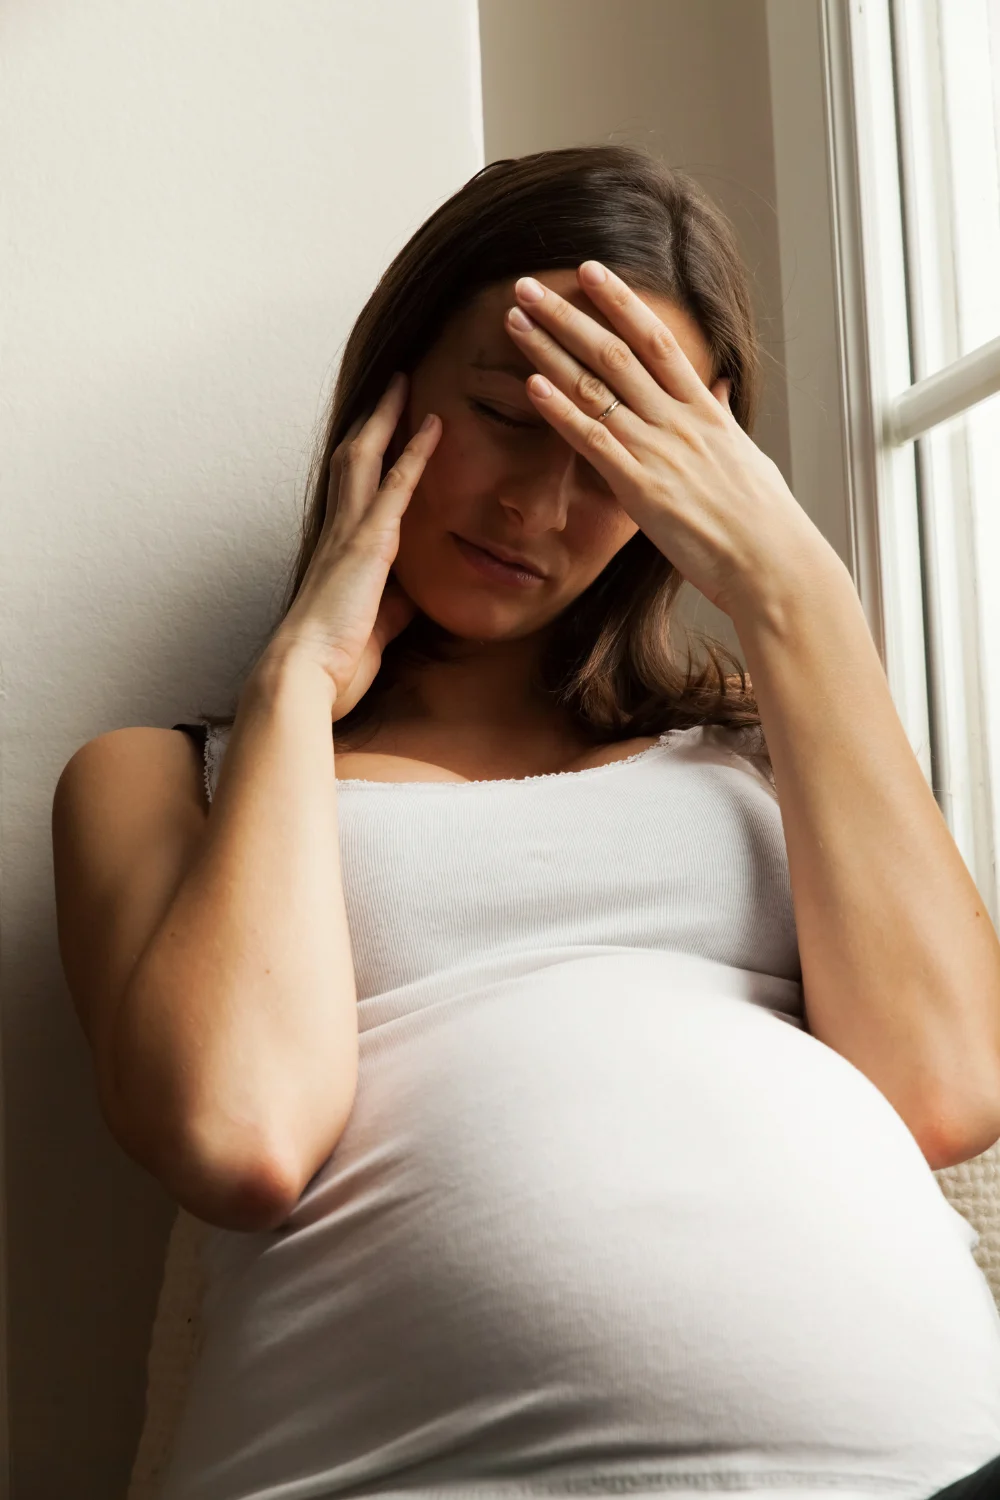 Why Do Guys Leave When You're Pregnant?